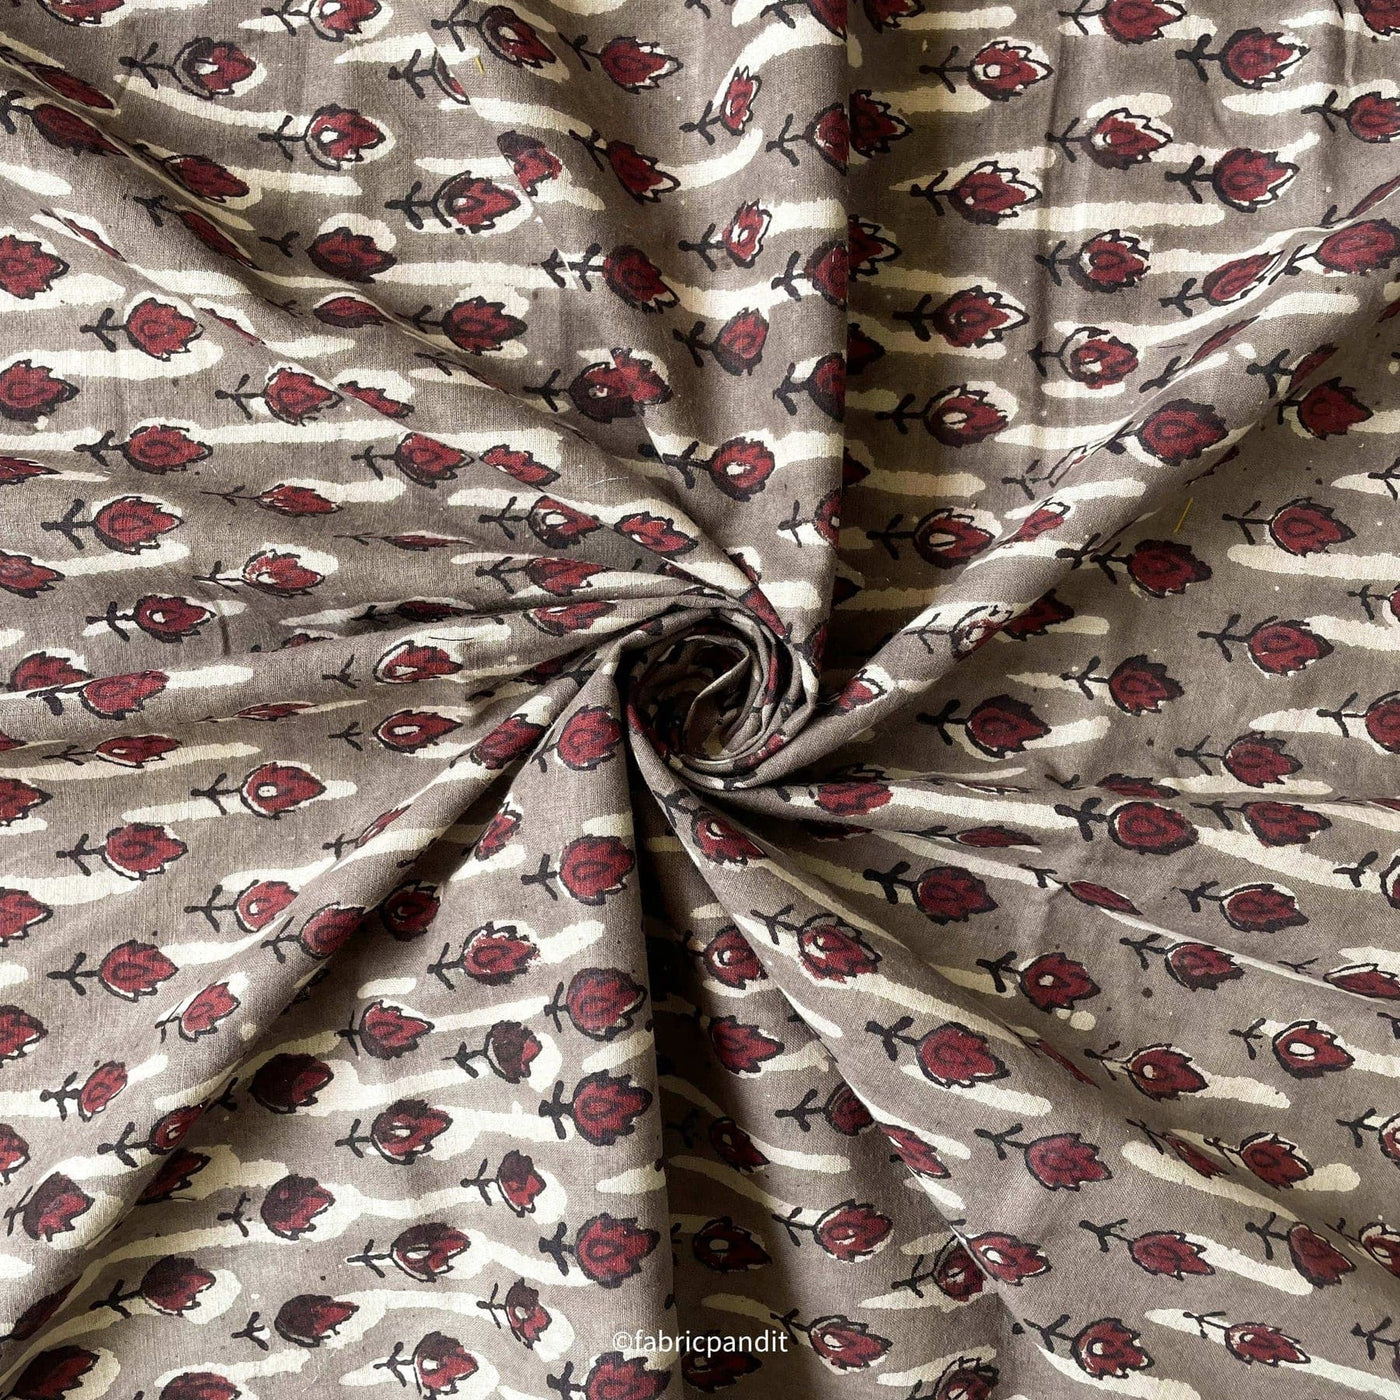 Hand Block Printed Cotton Fabric Cut Piece (CUT PIECE) Dusty Grey & Red Abstract Tulips Hand Block Printed Pure Cotton Fabric (Width 42 inches)